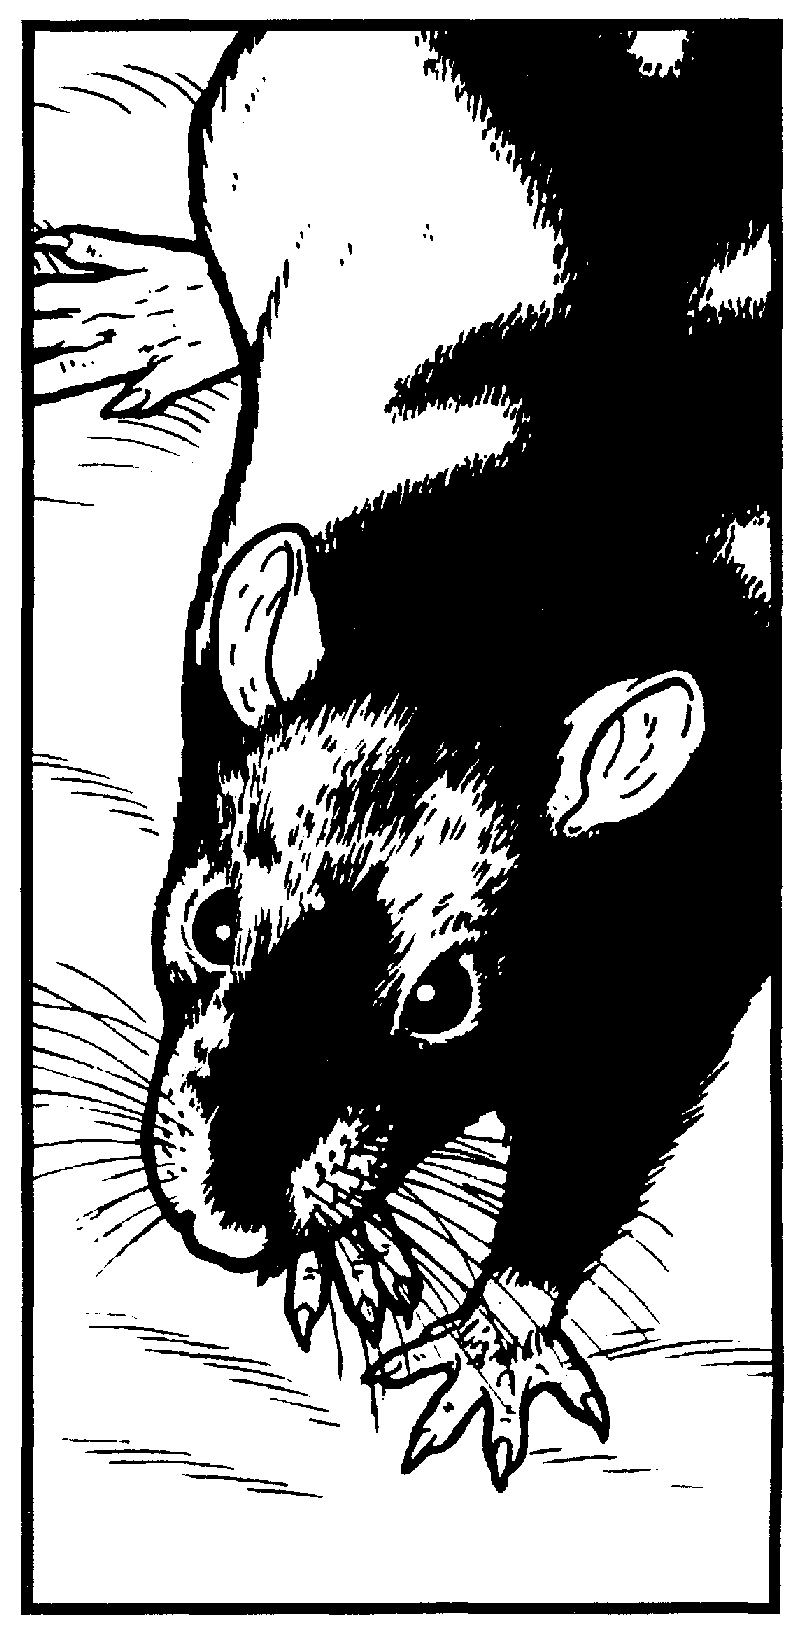 Realistic black & white drawing of head and back of black hooded rat, seen from above